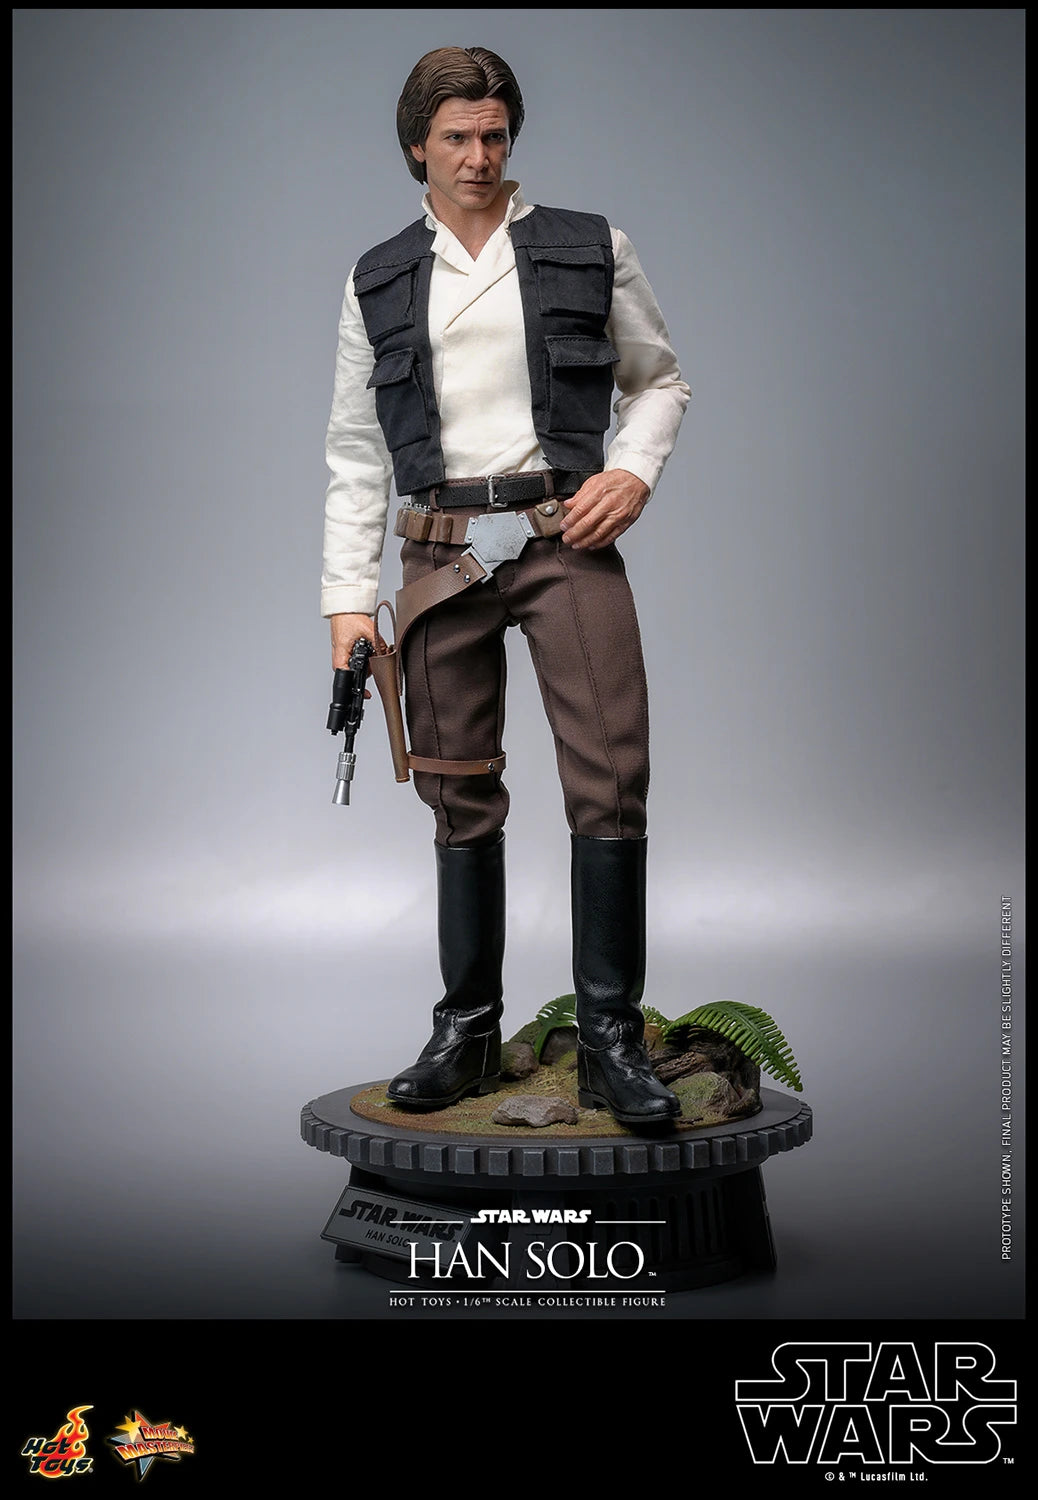 Hot Toys Star Wars Return of the Jedi Han Solo 1/6th Scale Figure